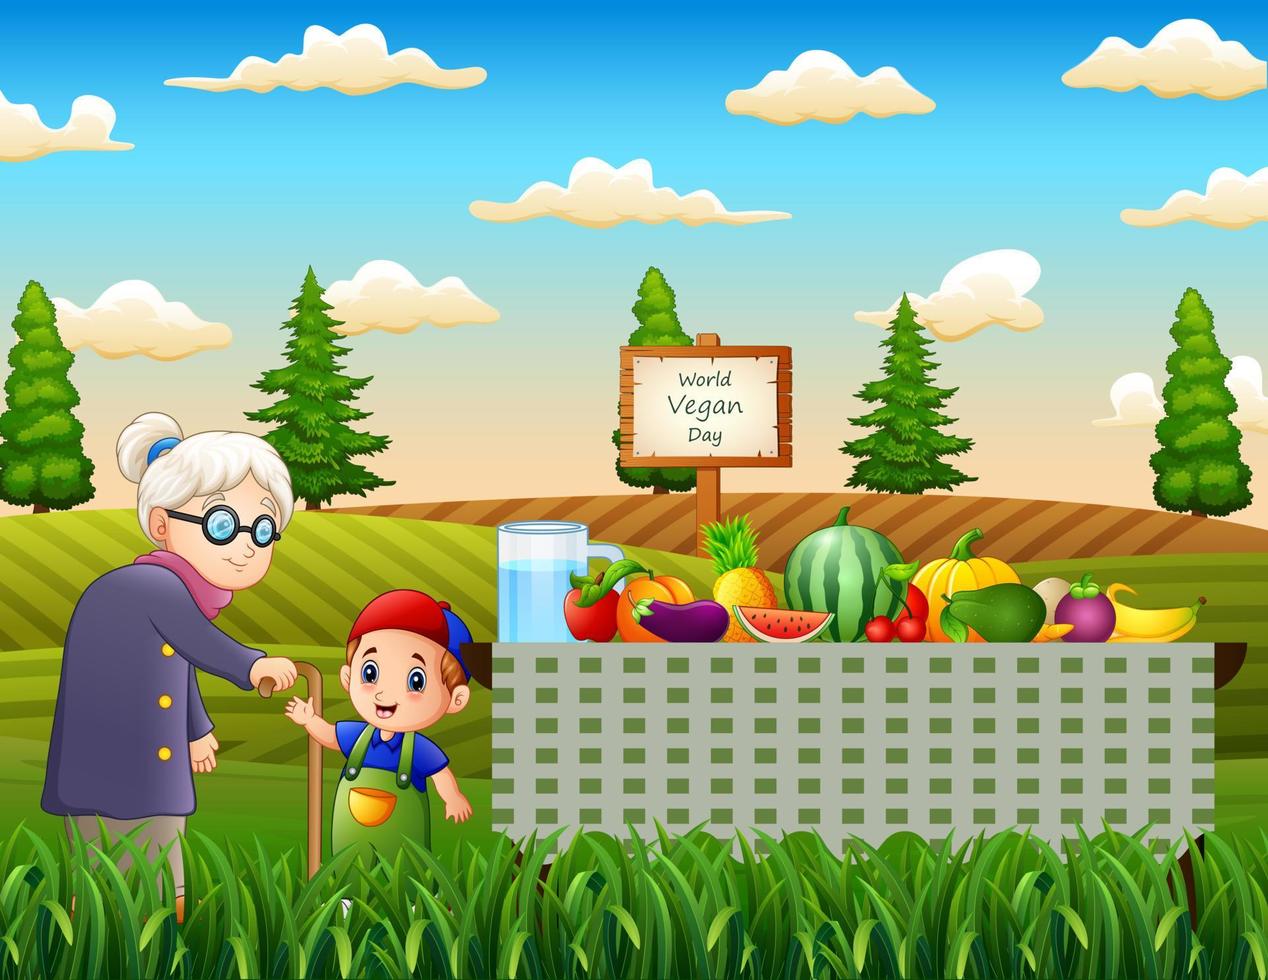 World Vegan Day background with old women and a boy in the garden vector